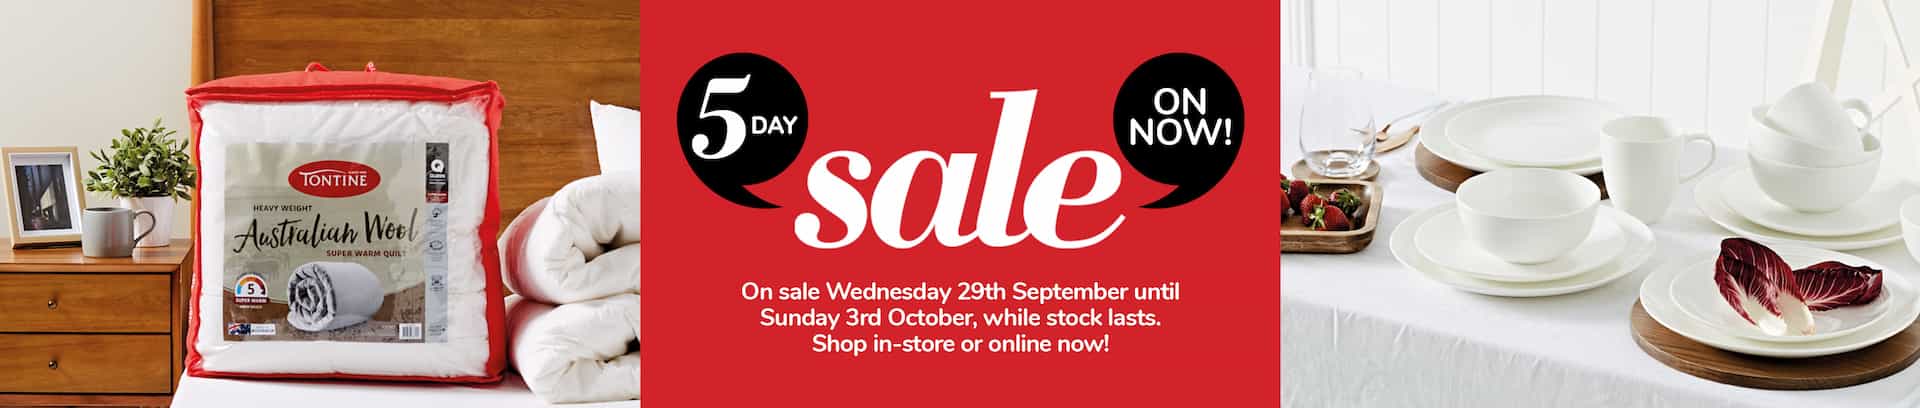 5 Day sale - Up to 50% OFF on cookware, clothing, bedding & more